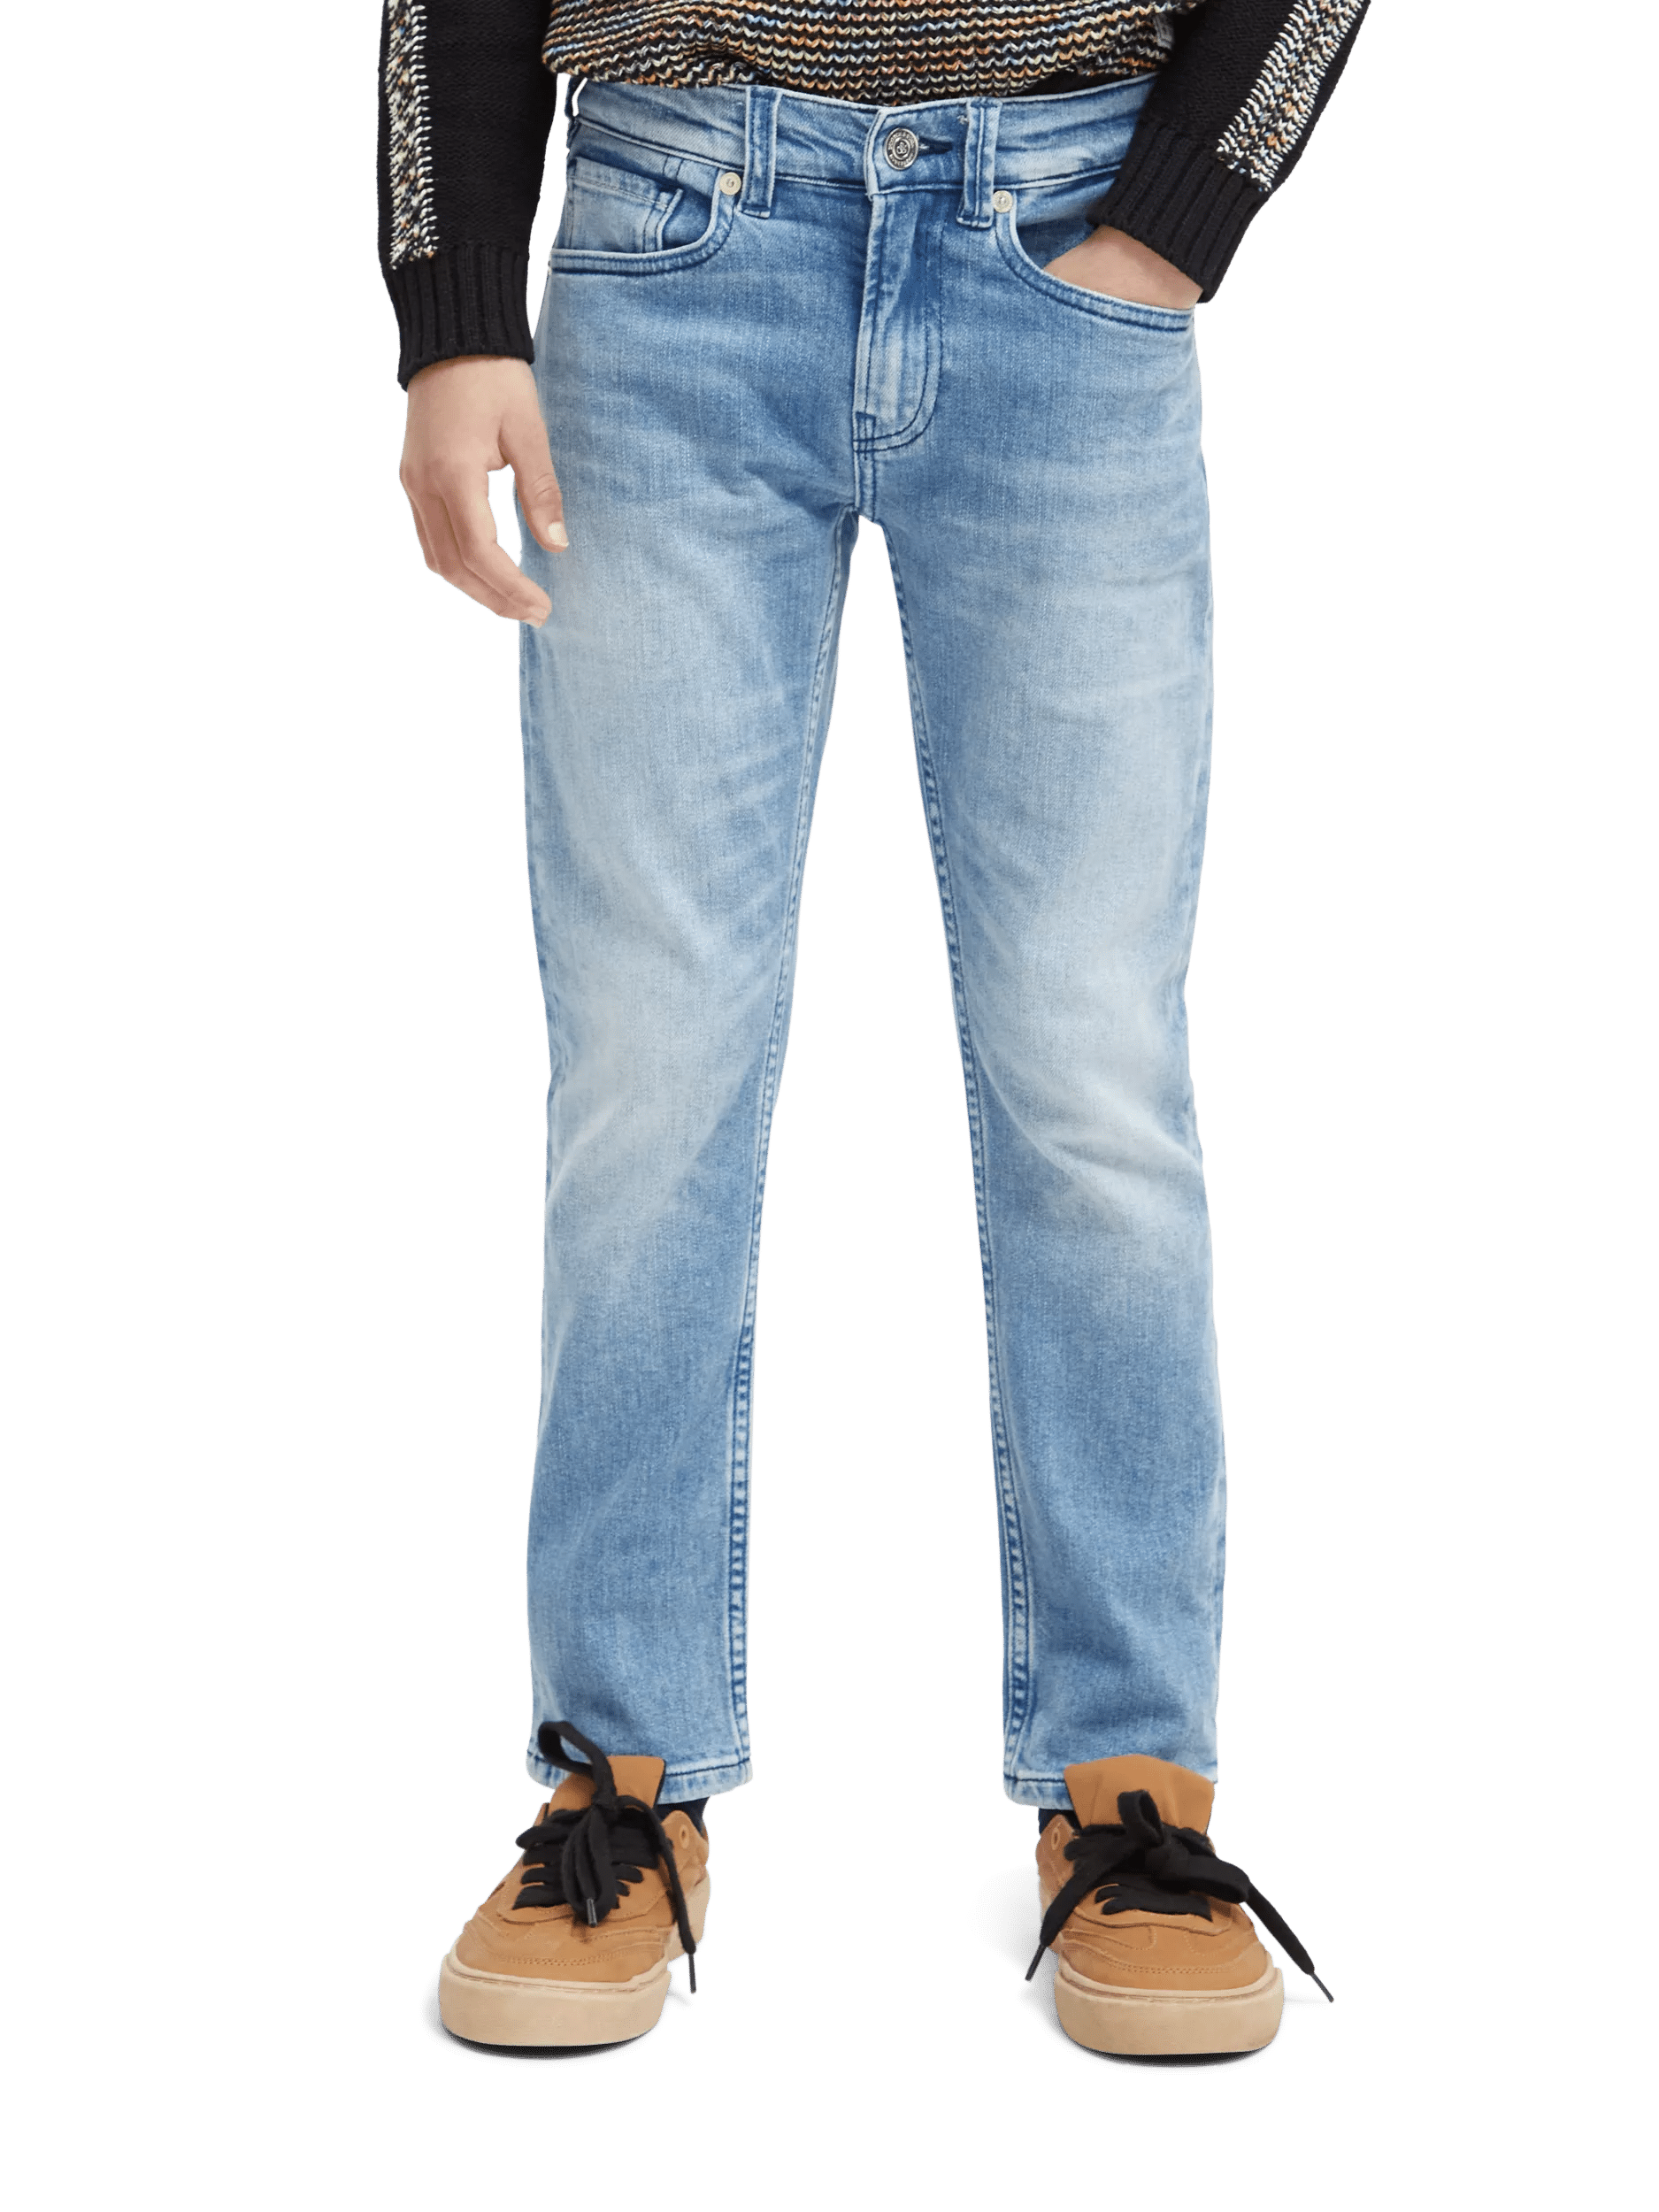 Scotch & Soda The Drop tapered jeans   Blue Clash MDL-CRP